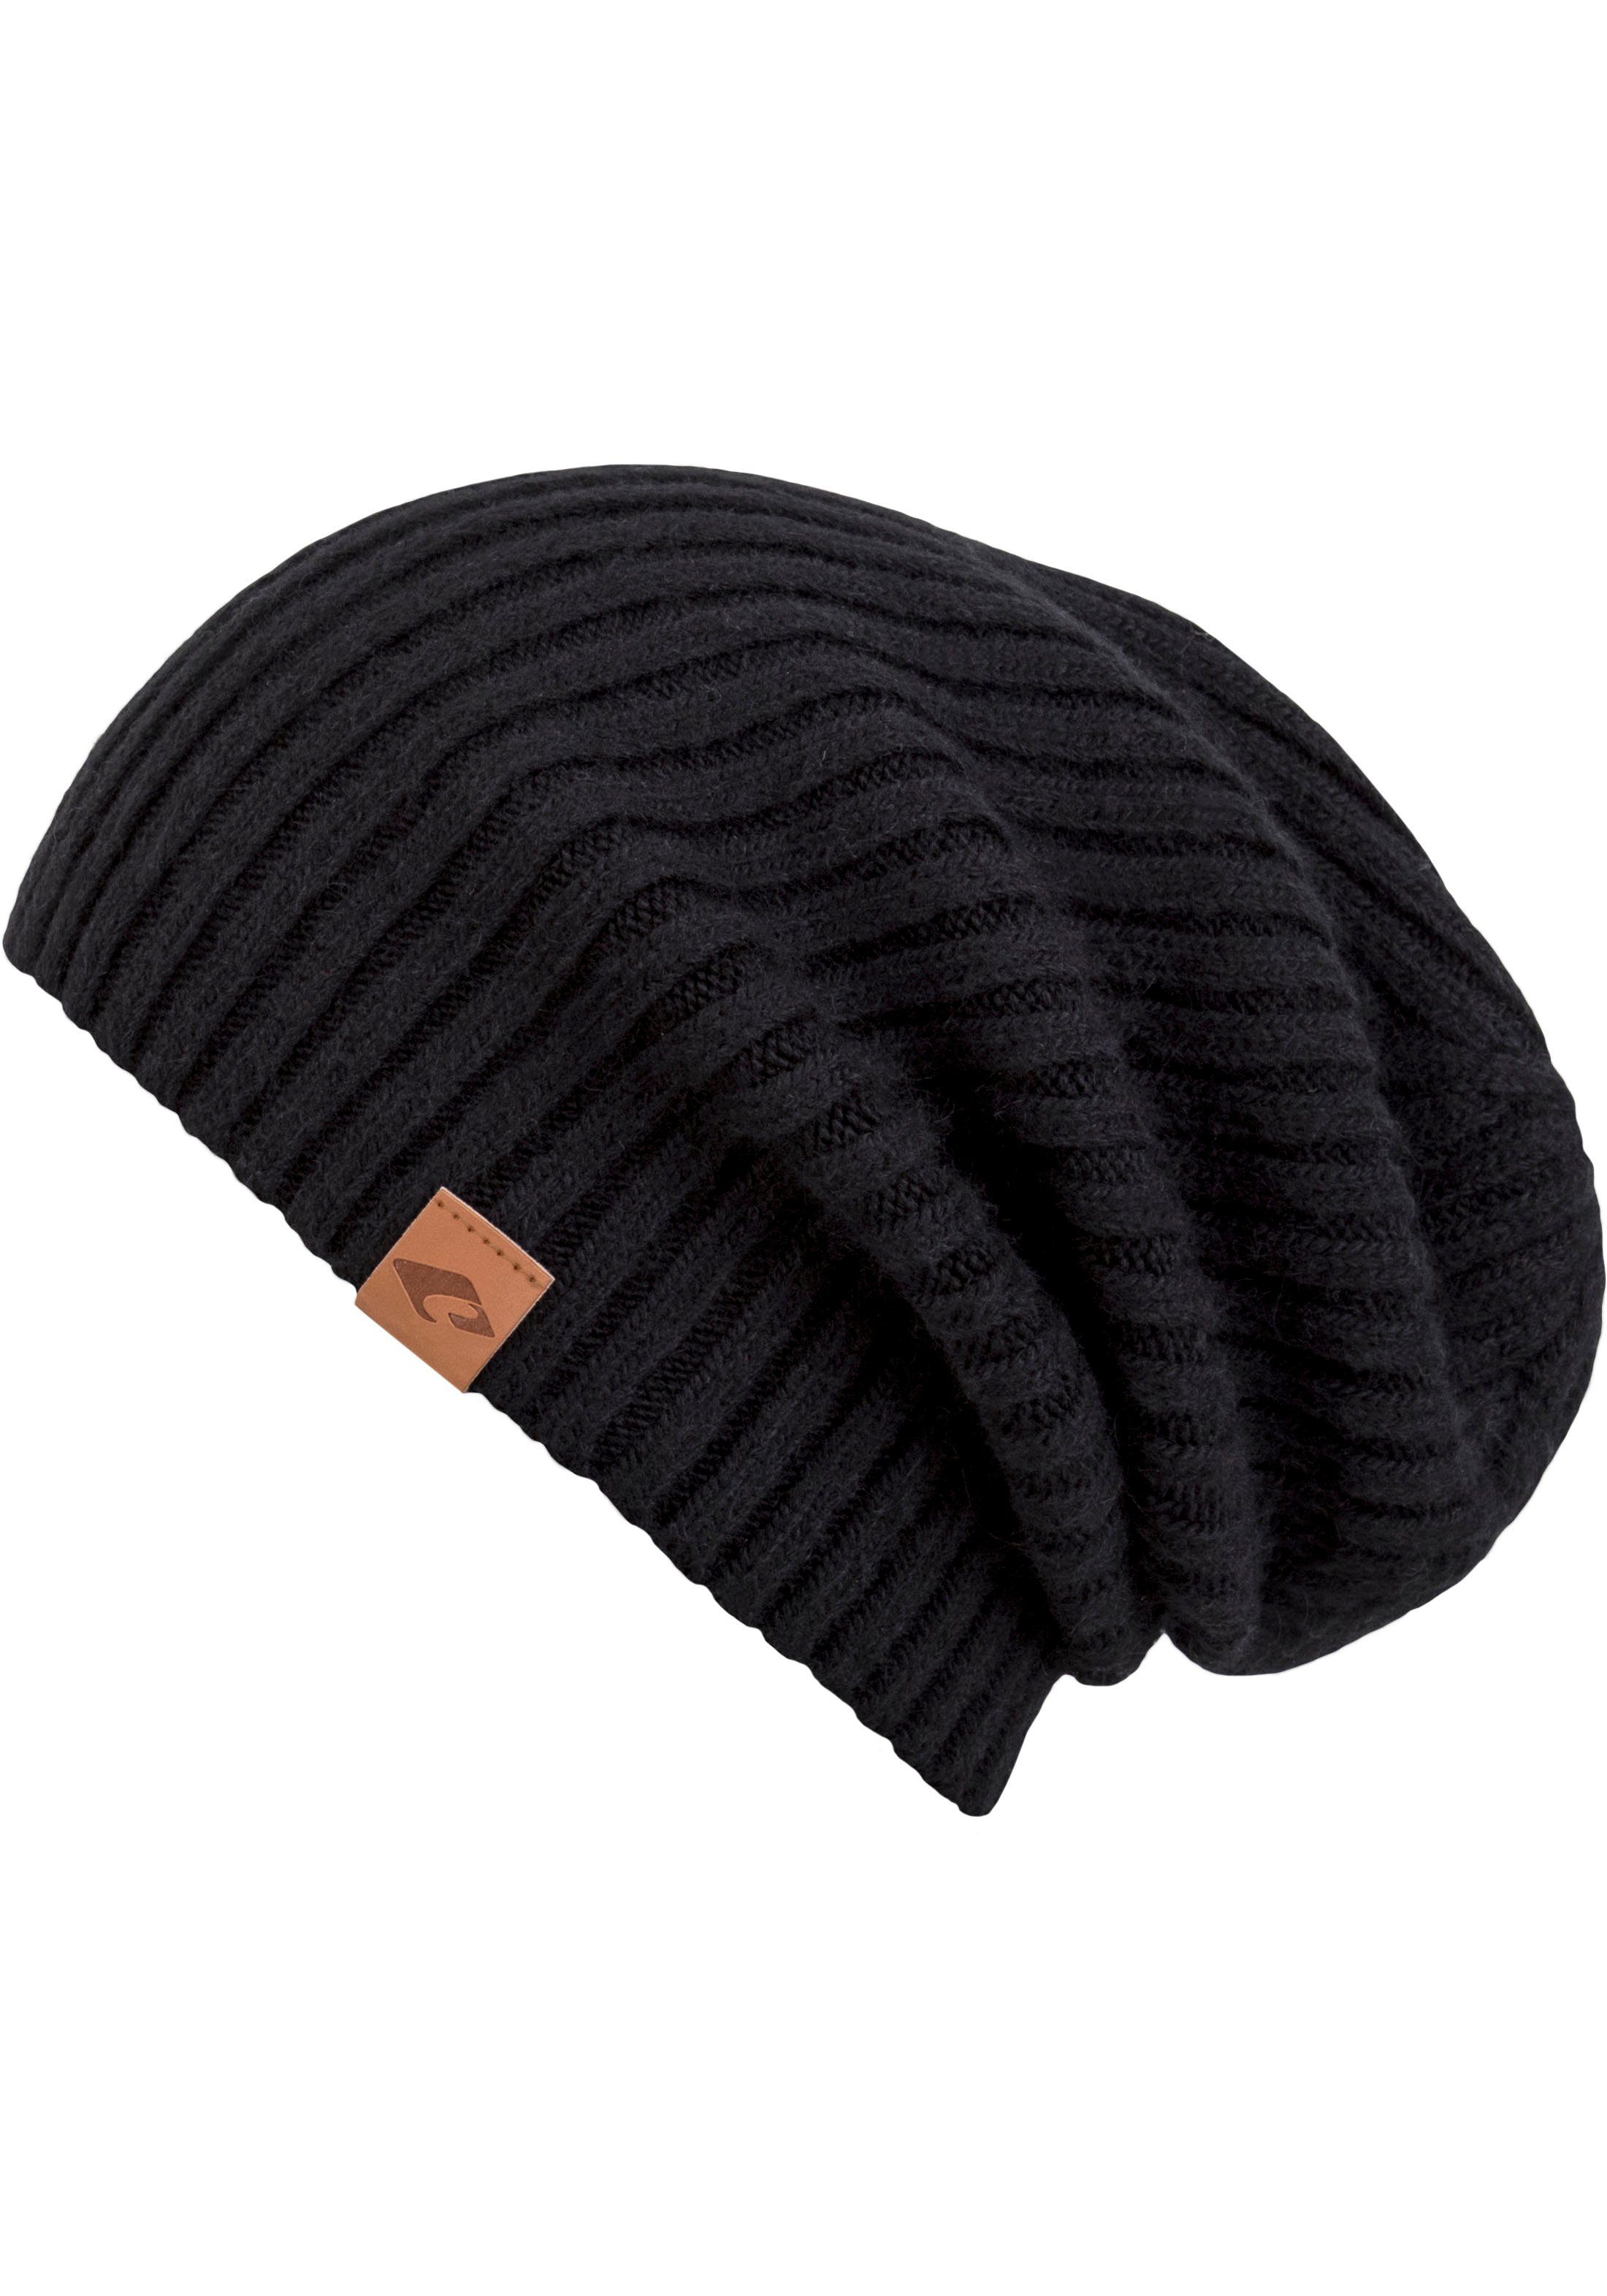 chillouts Beanie Justin black Hat